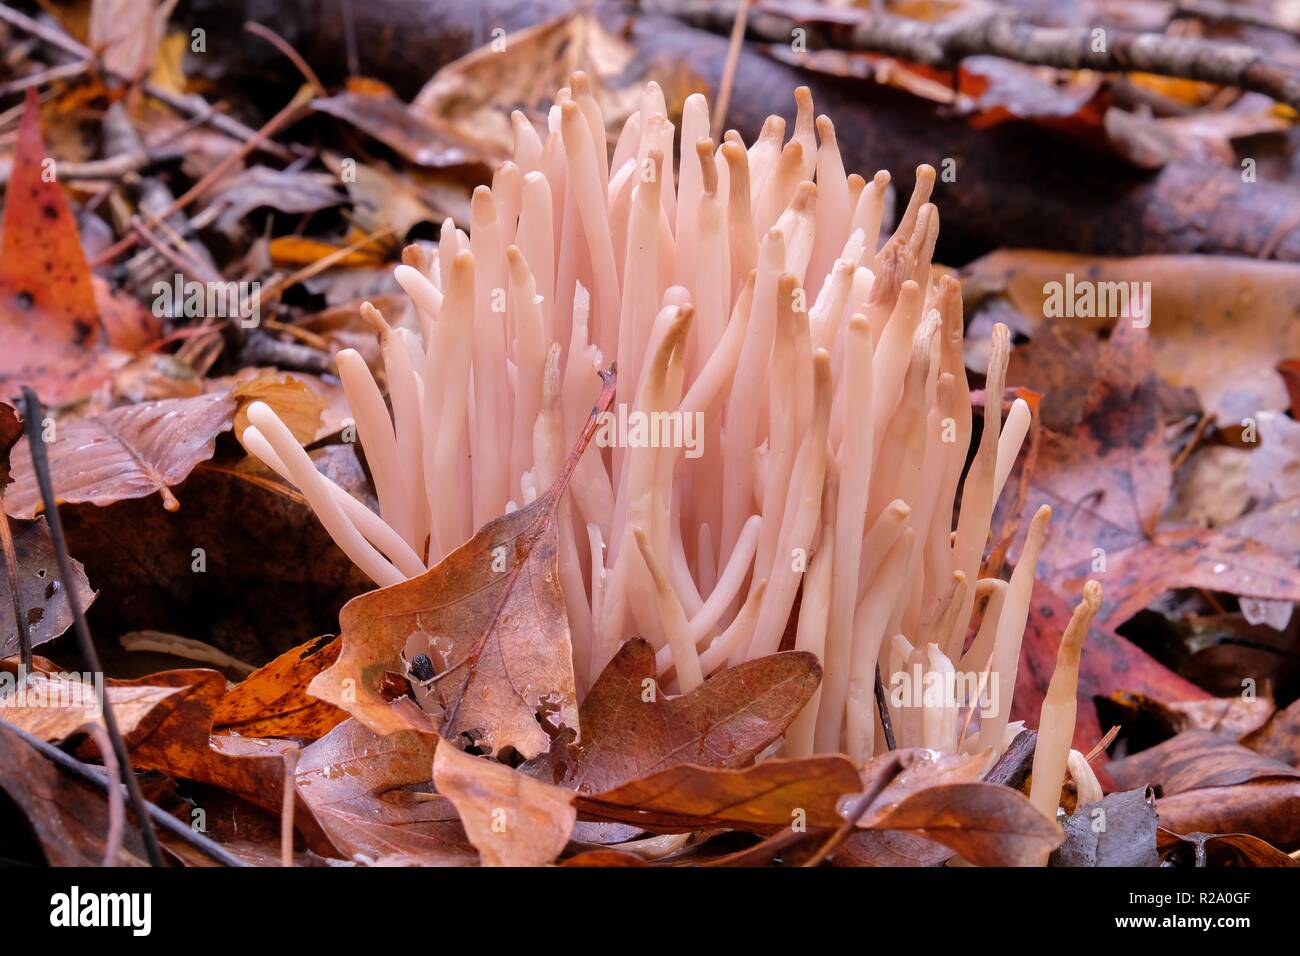 Closeup of a cluster of smokey spindles fungus in the forest at Crowder Park in Apex, North Carolina. This is an inedible species of coral fungus. Stock Photo